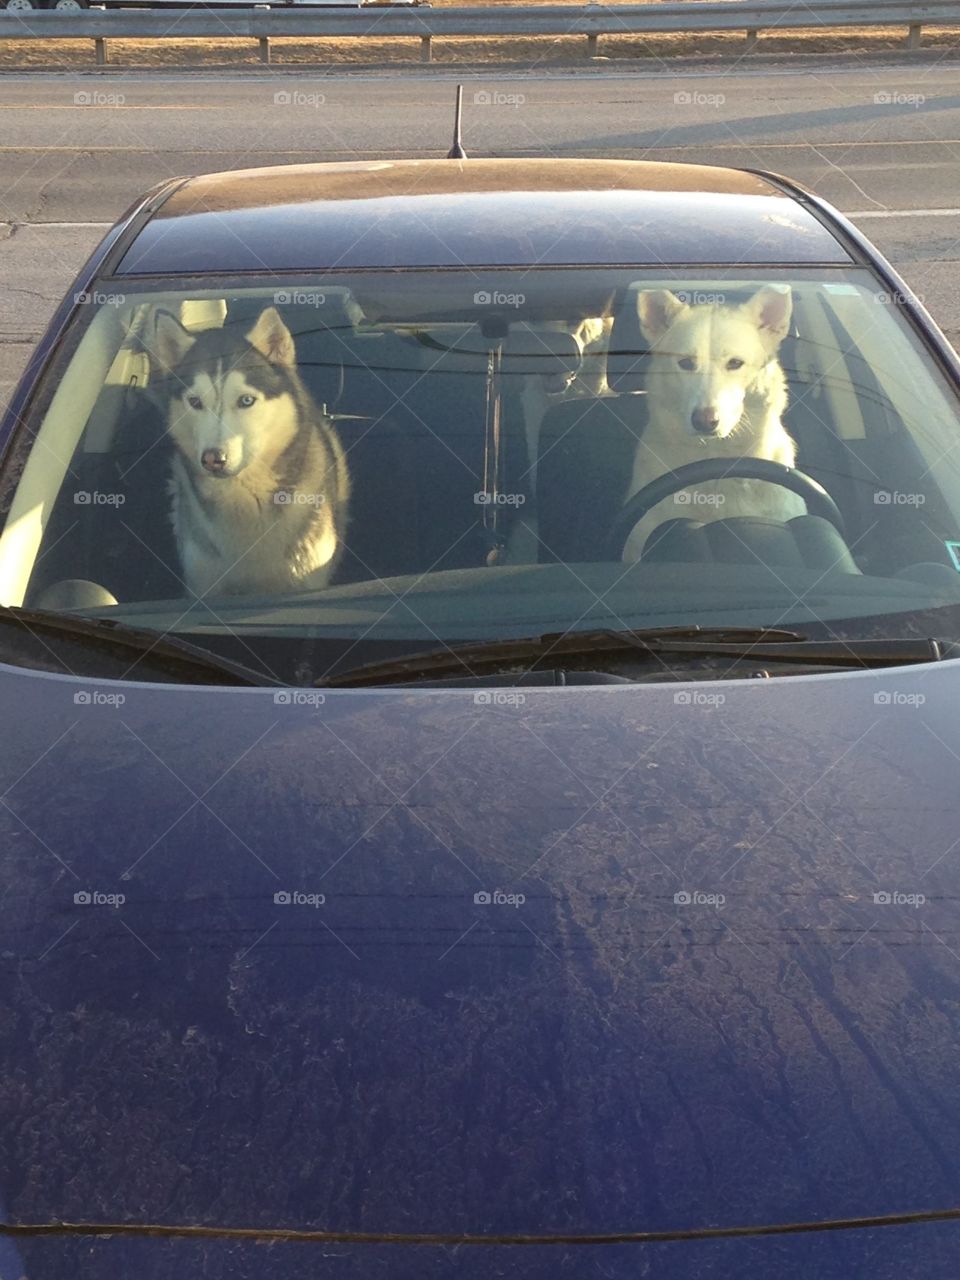 Dogs stealing a car